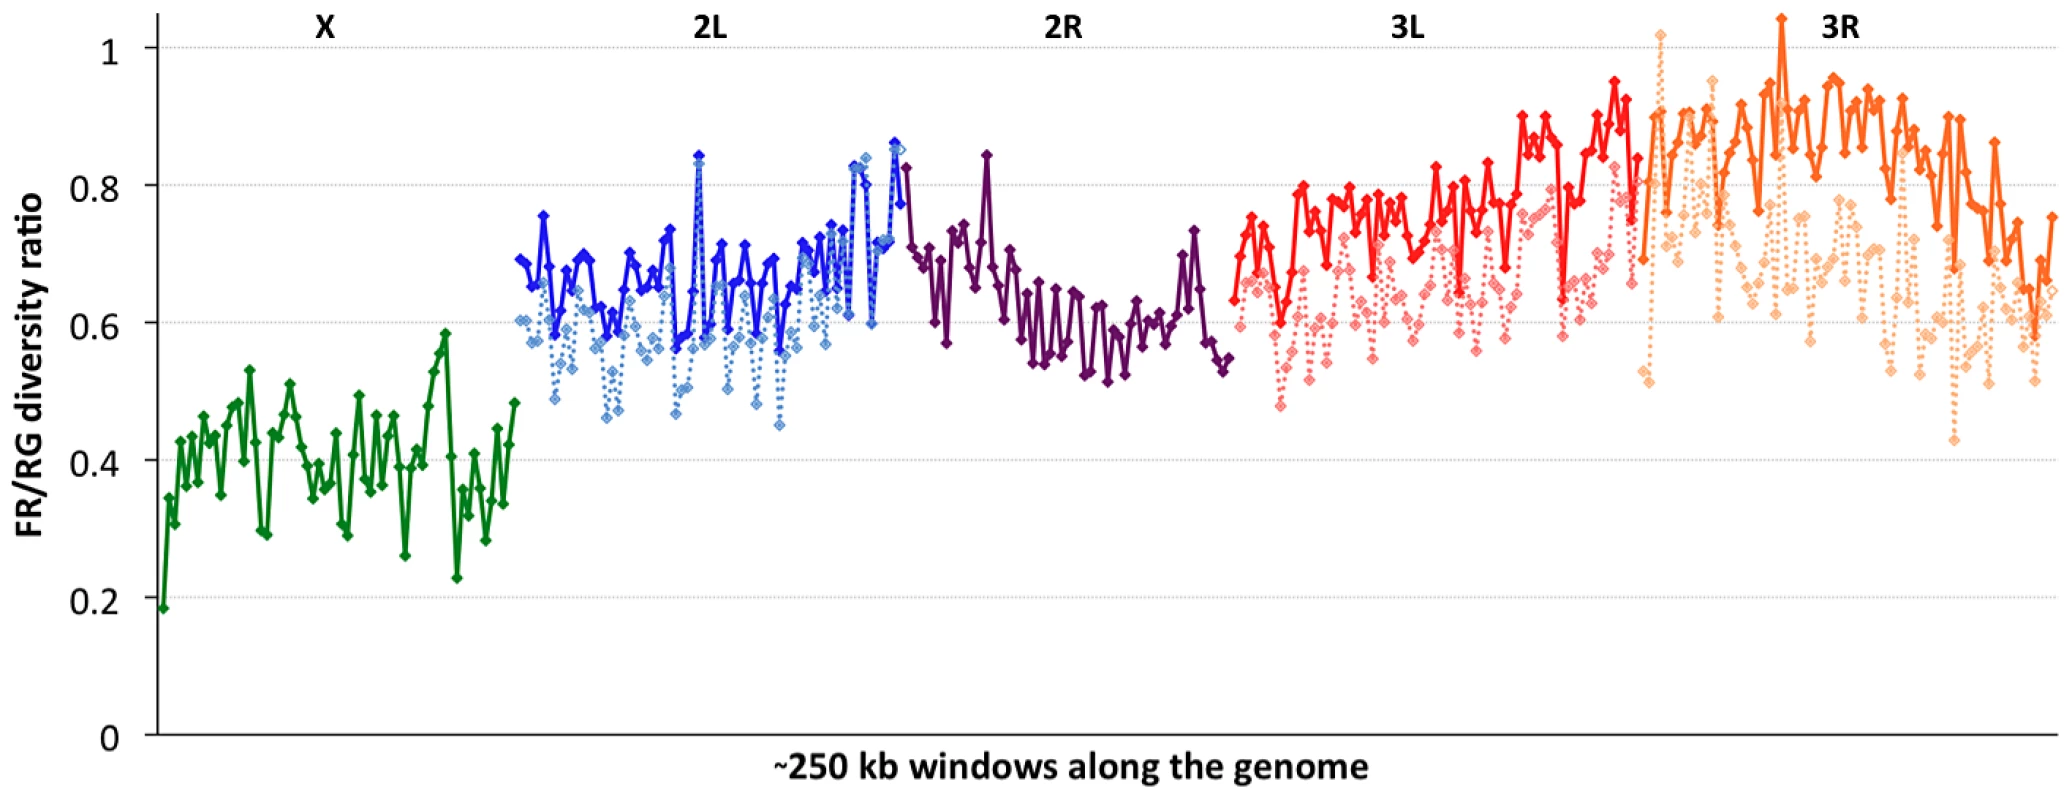 The ratio of nucleotide diversity between non-African (France, FR) and African (Rwanda, RG) genomes.